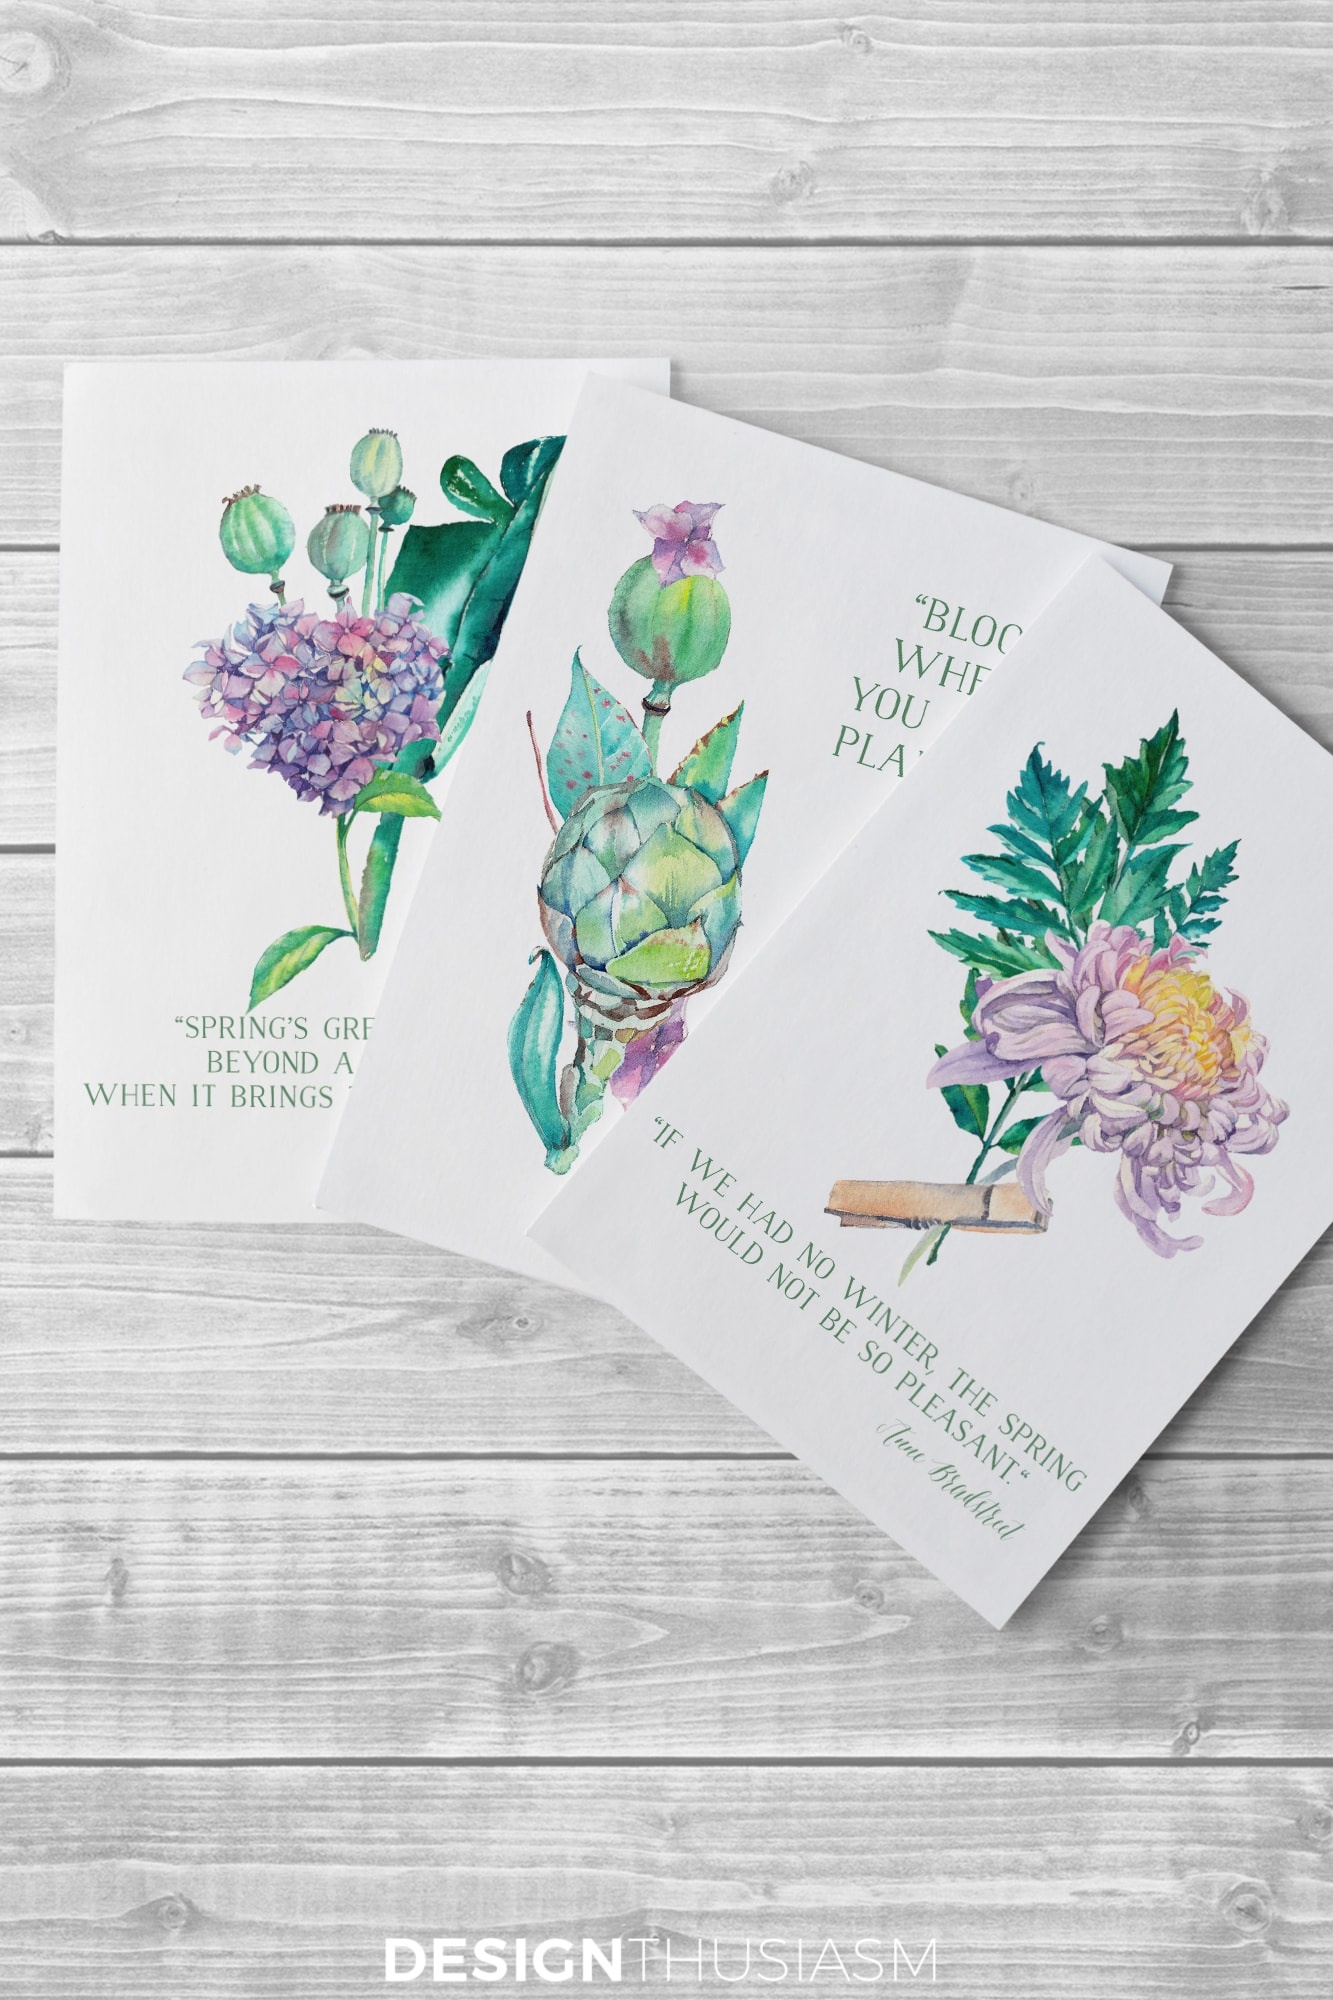 Free Printable Art For Spring: Watercolor Flowers For Diy Wall Decor - Free Printable Wall Art Decor